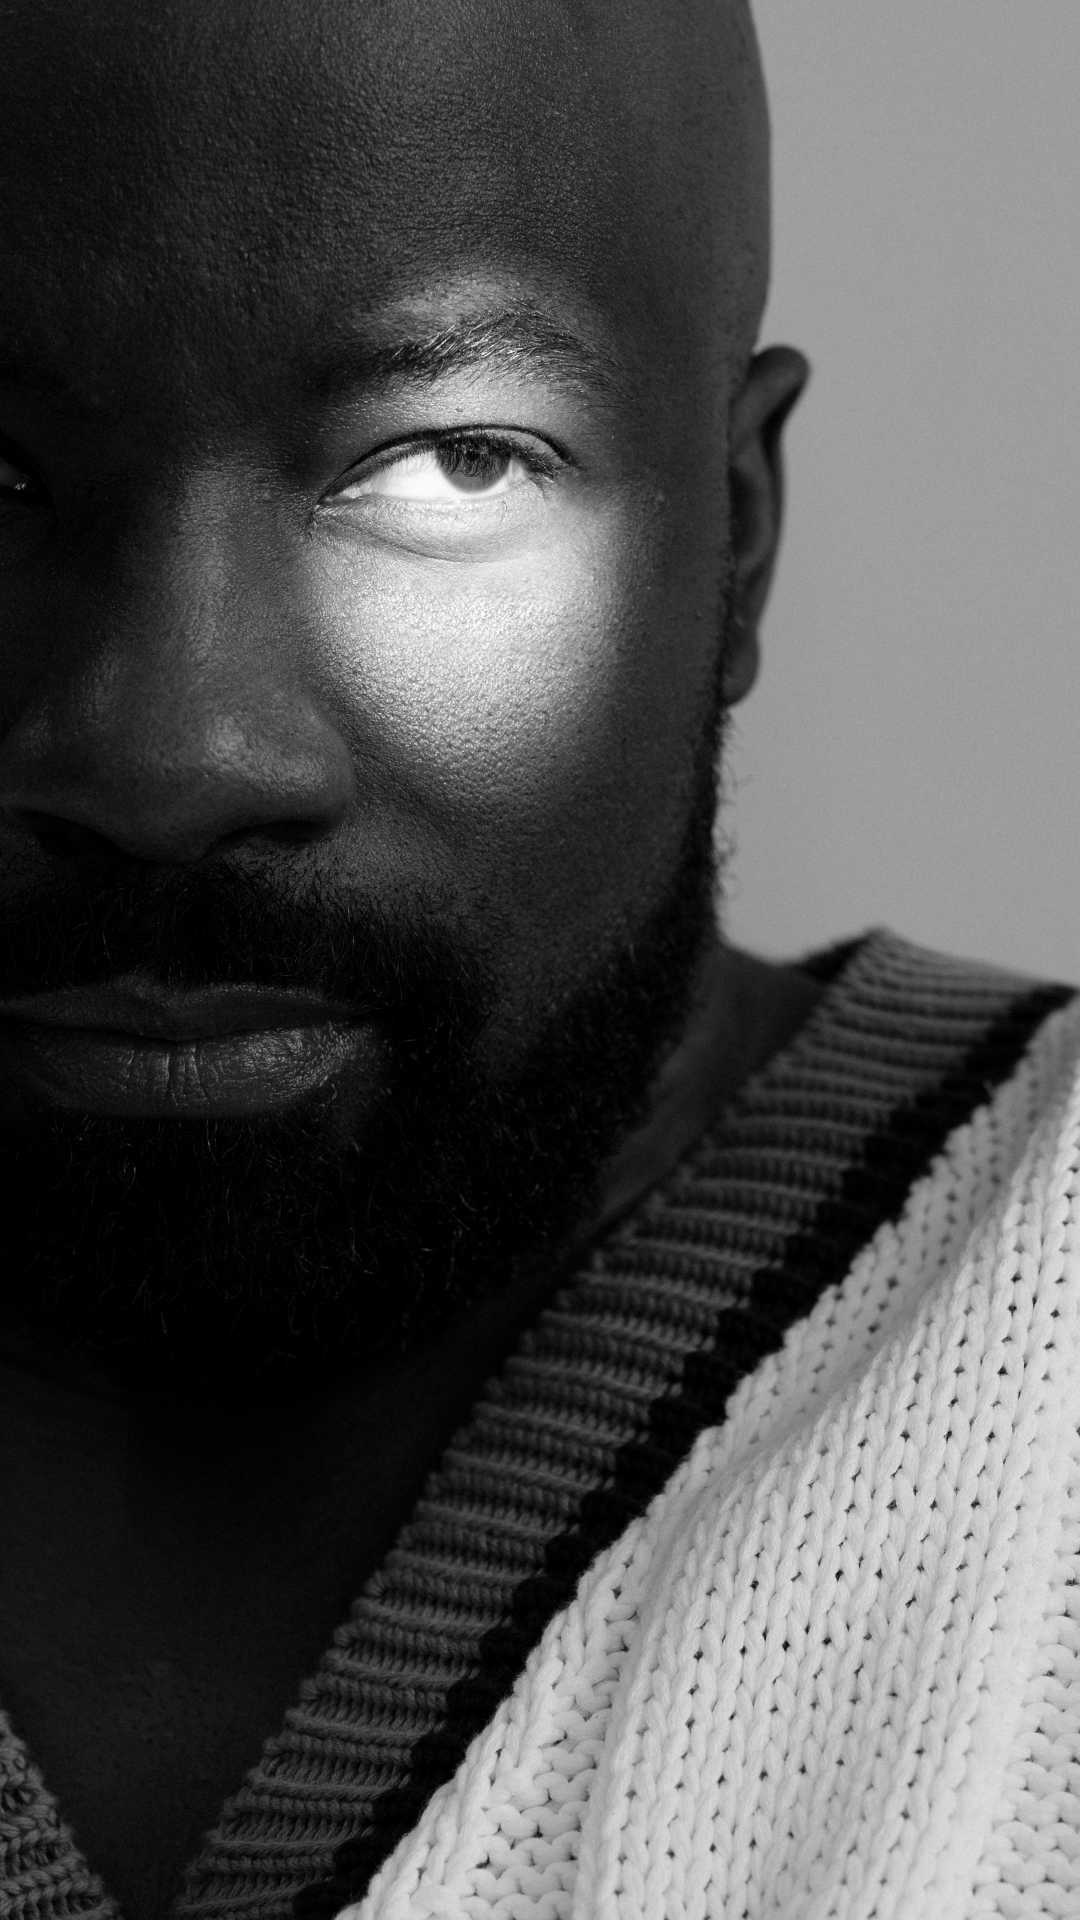 Mike Colter talks about his passion for acting